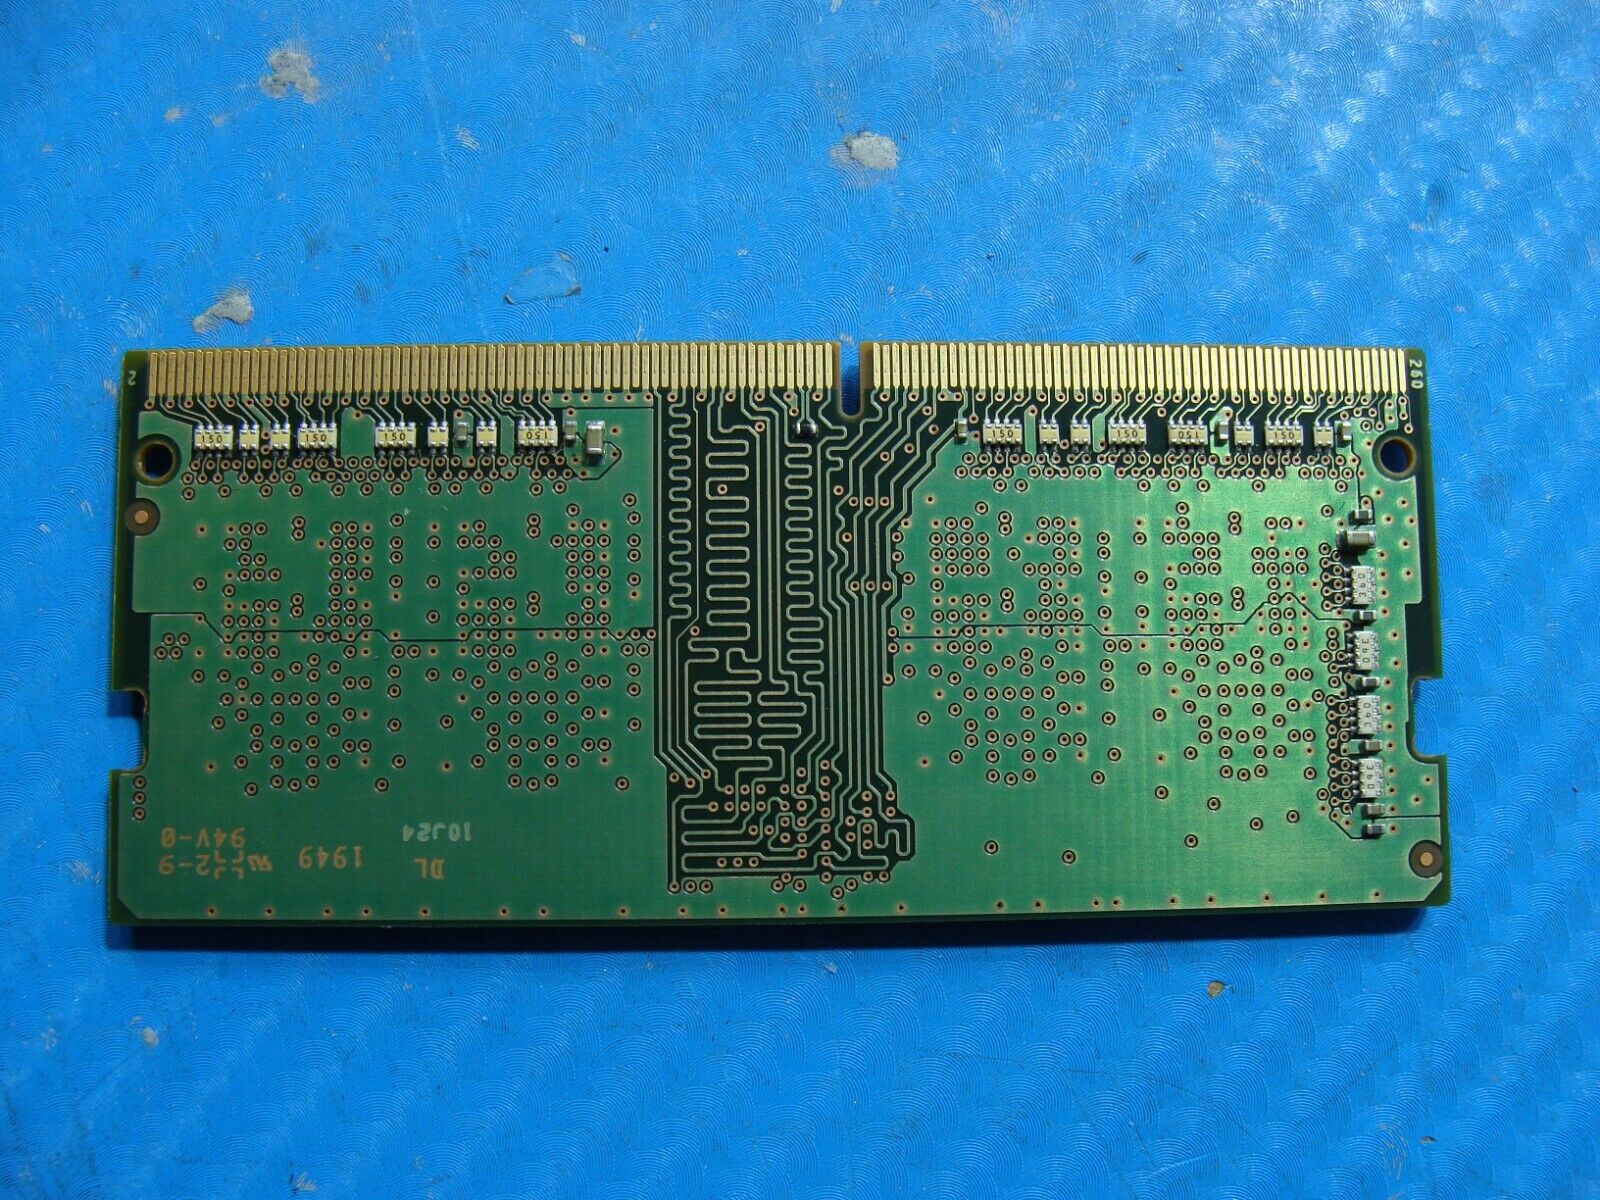 Dell 7500 2in1 Samsung 4GB 1Rx16 PC4-3200AA Memory RAM SO-DIMM M471A5244CB0-CWE